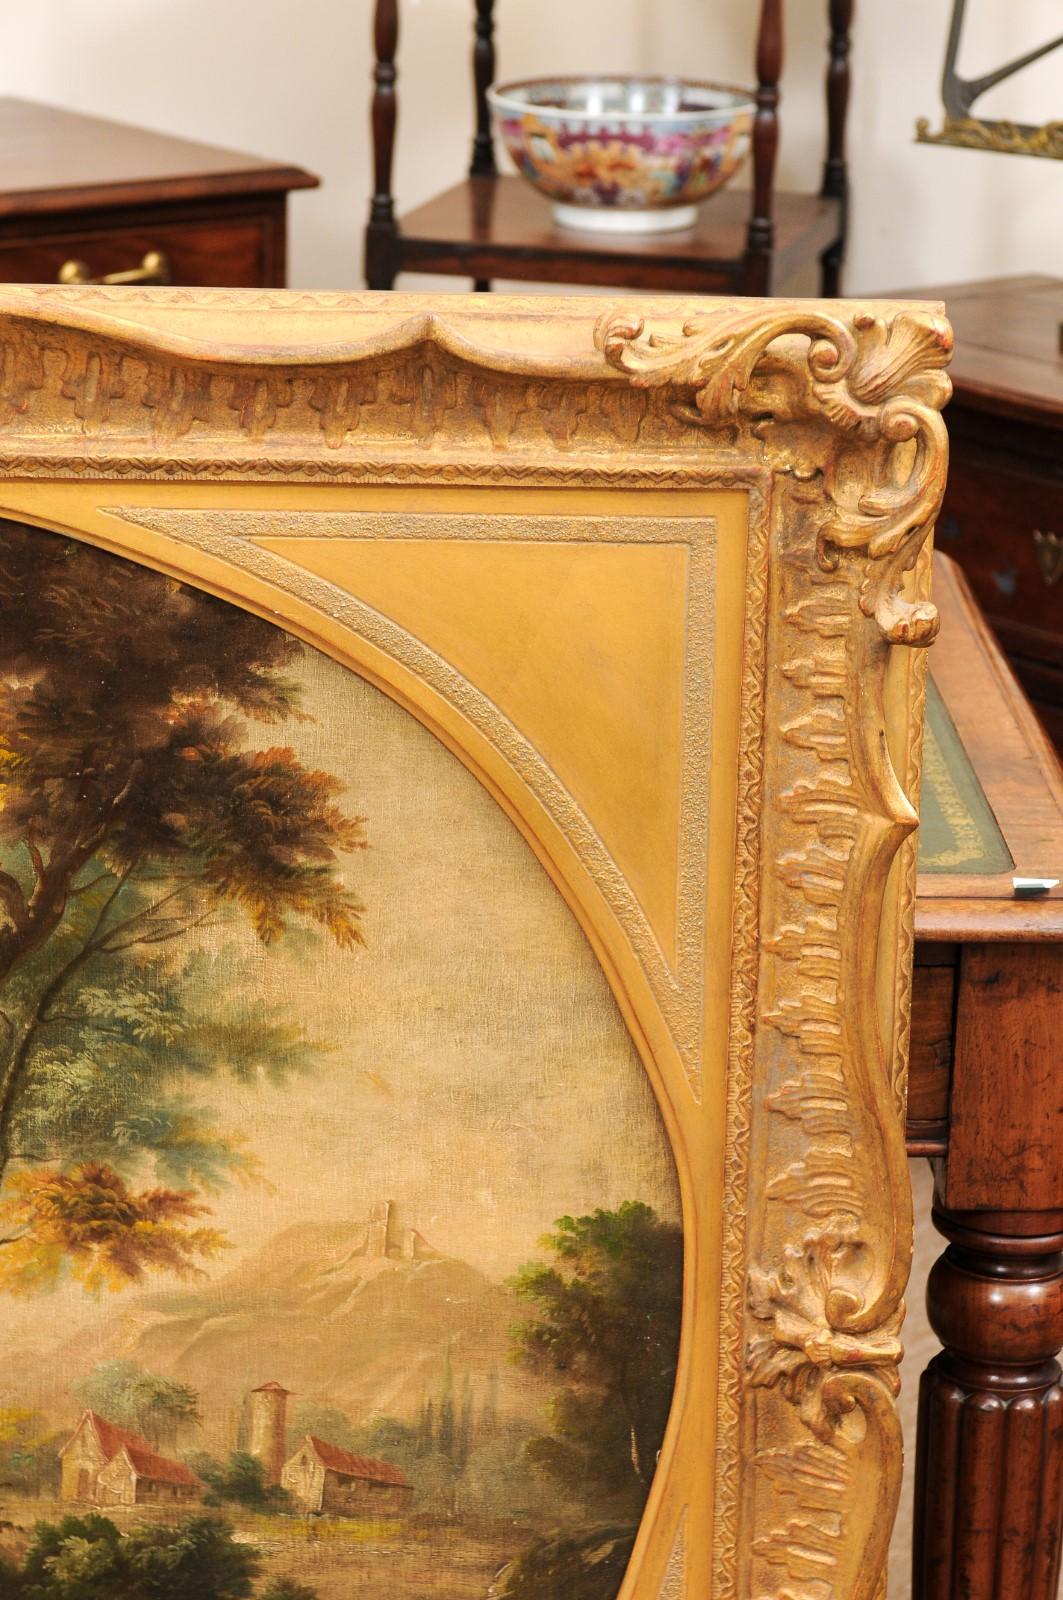 Large 19th Century English Oil on Canvas Landscape Painting in Gilt Frame For Sale 4